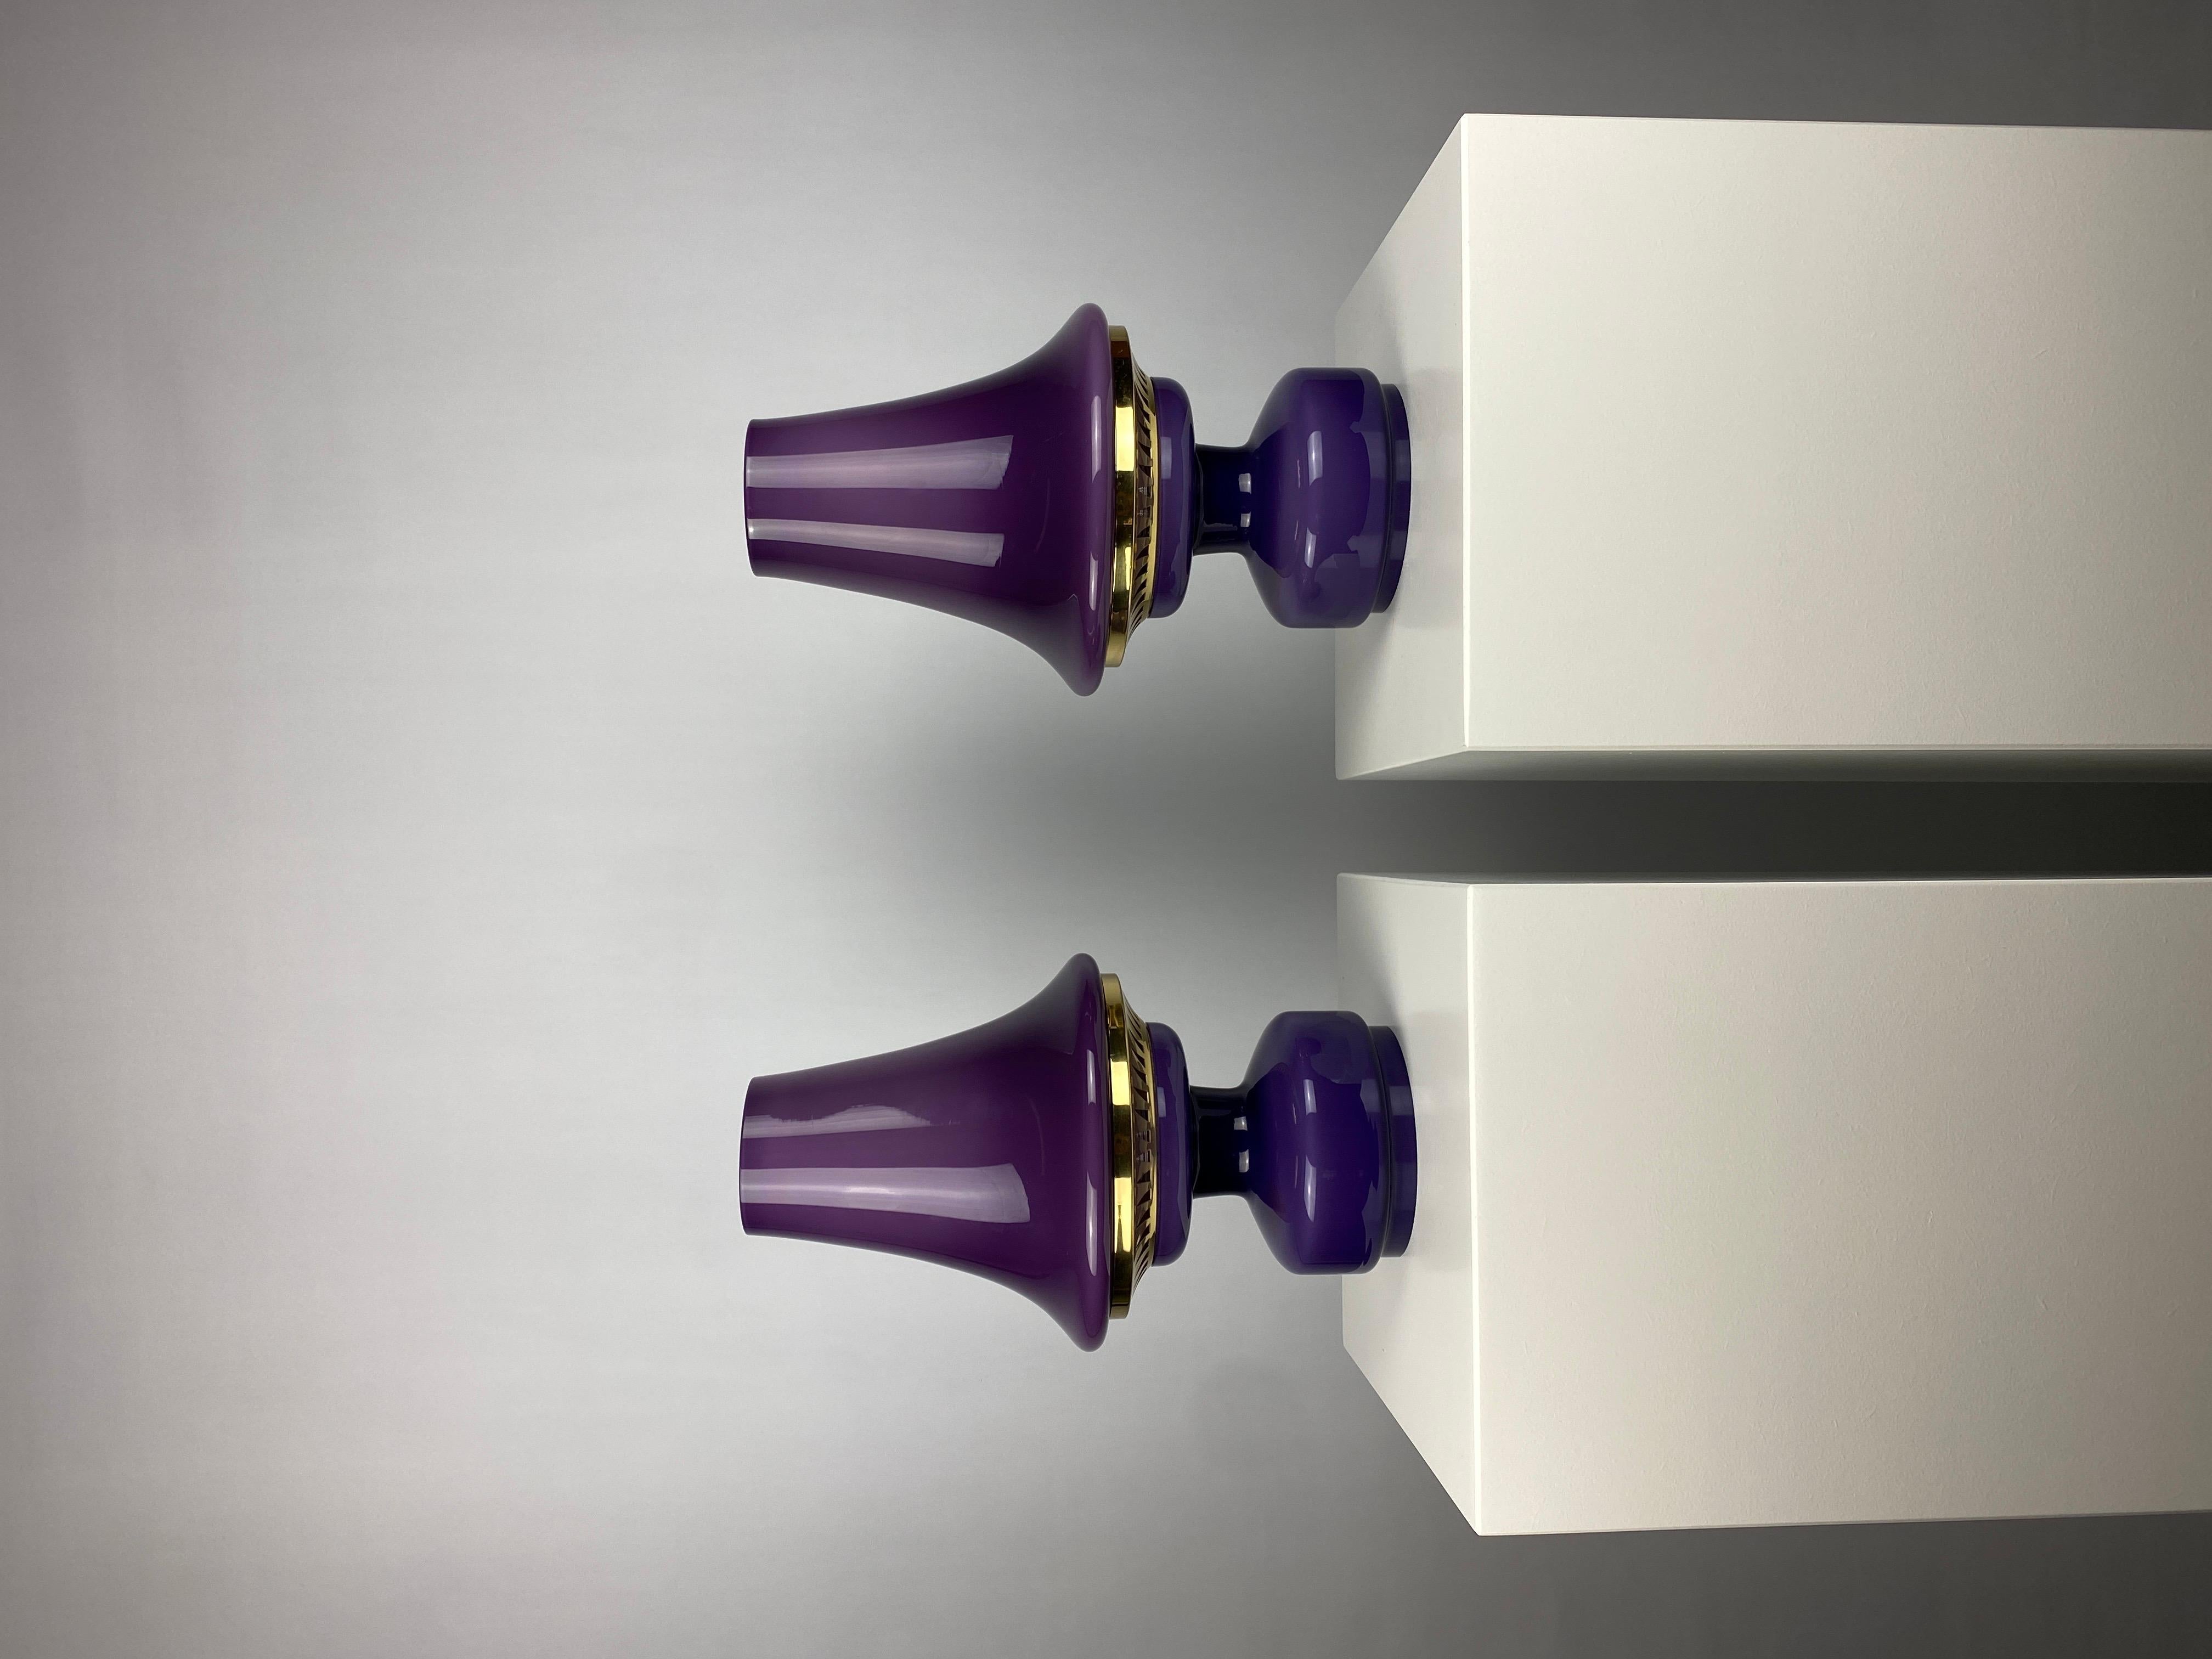 Beautiful pair of purple and brass table lights by Hans Agne Jakobsson for AB Markaryd. Model is called B-124 and they are produced around 1970. 

The color is really something, beautifully mouth blown purple opaline glass combined with the brass